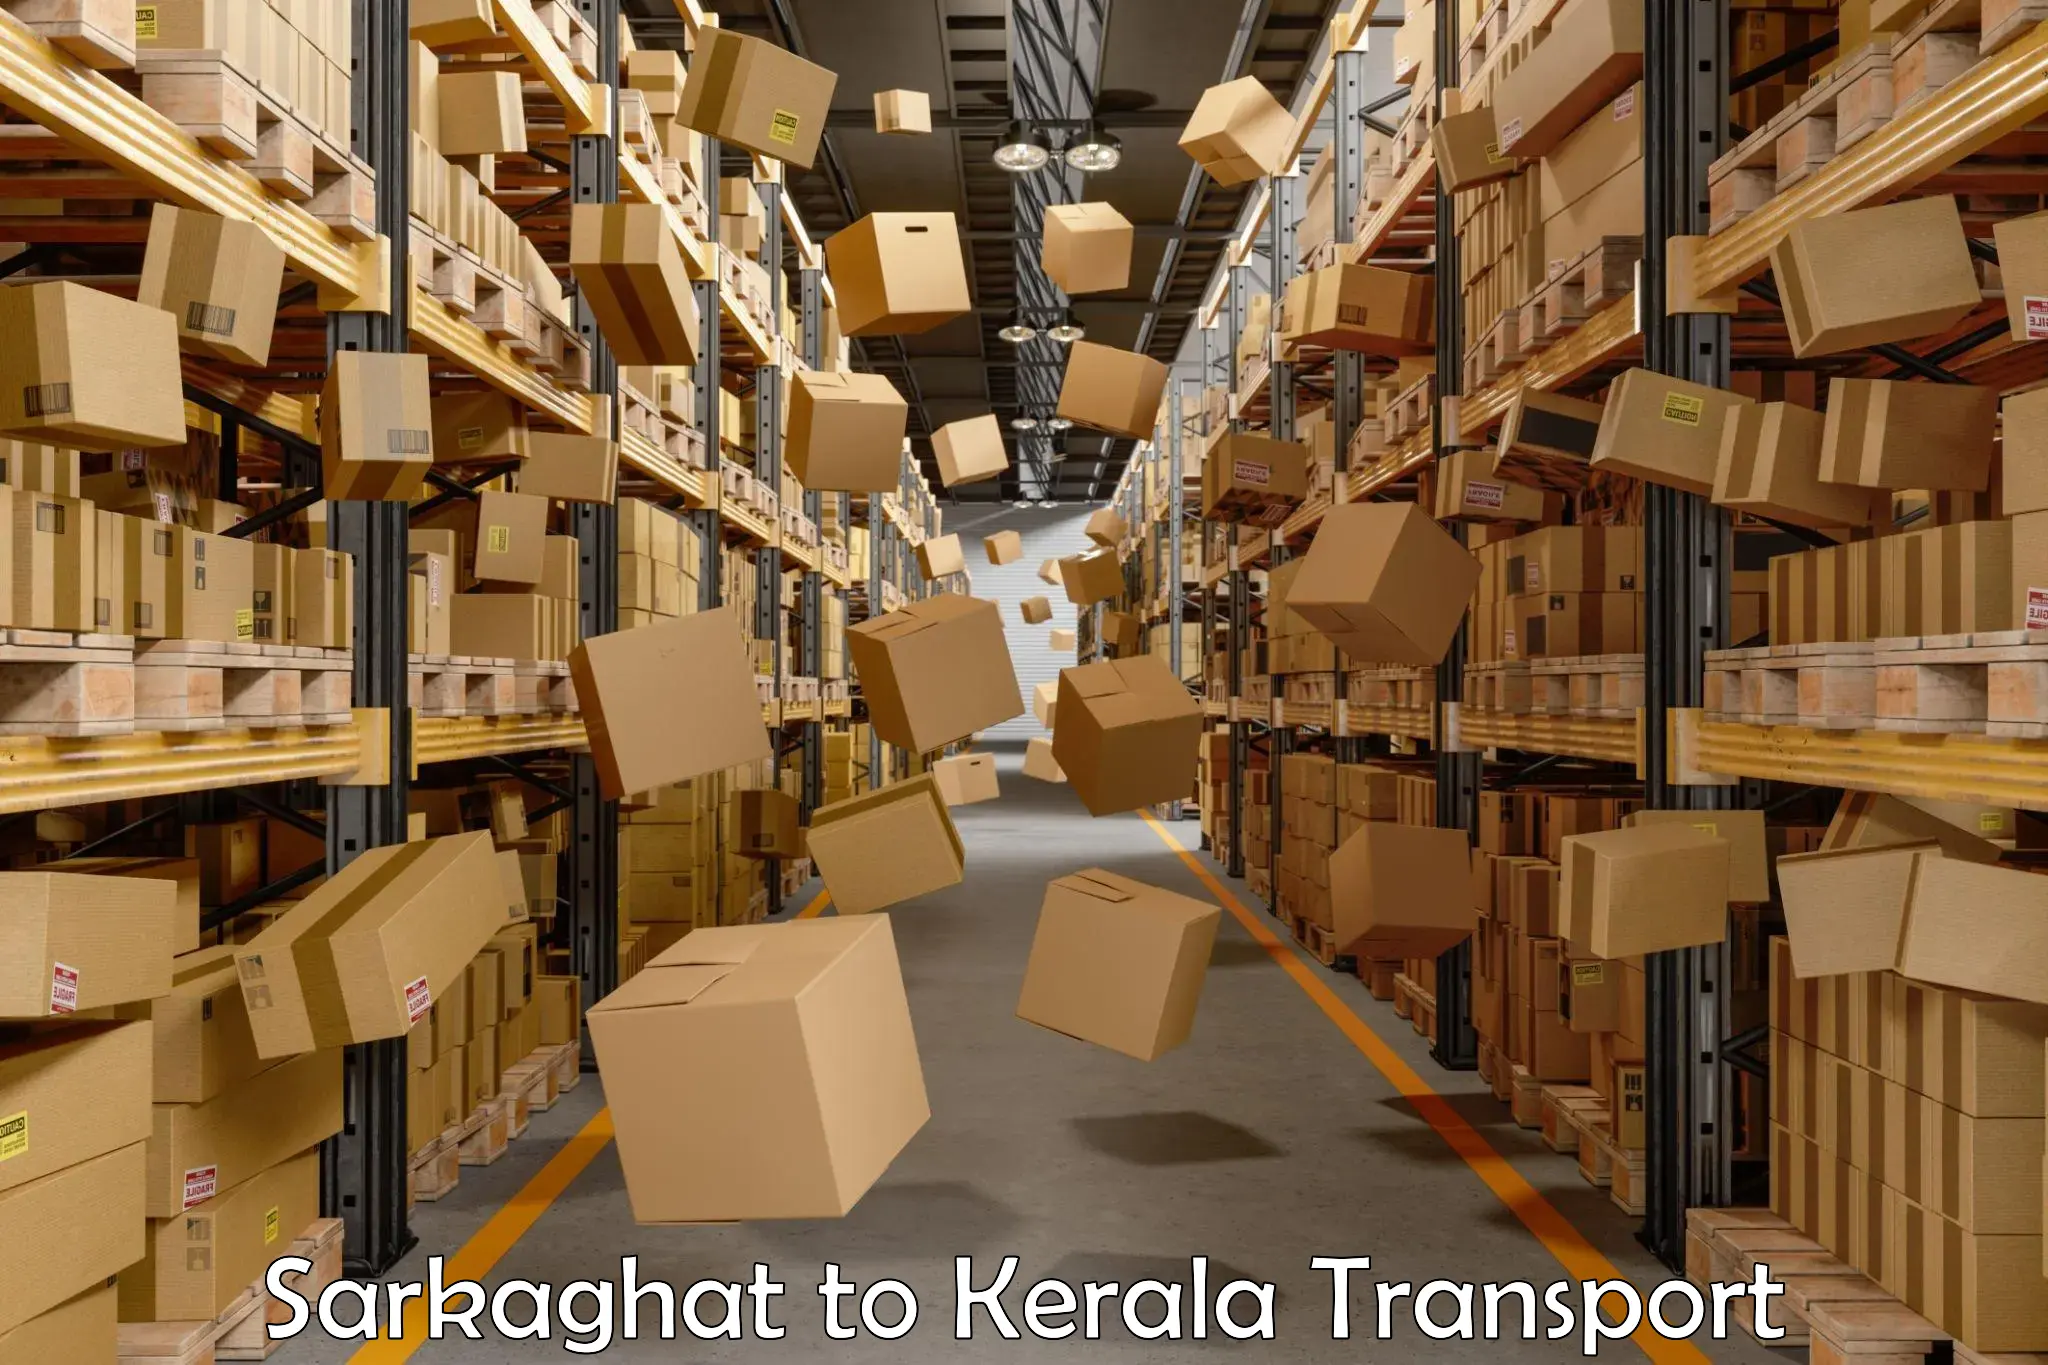 Land transport services in Sarkaghat to Cherpulassery